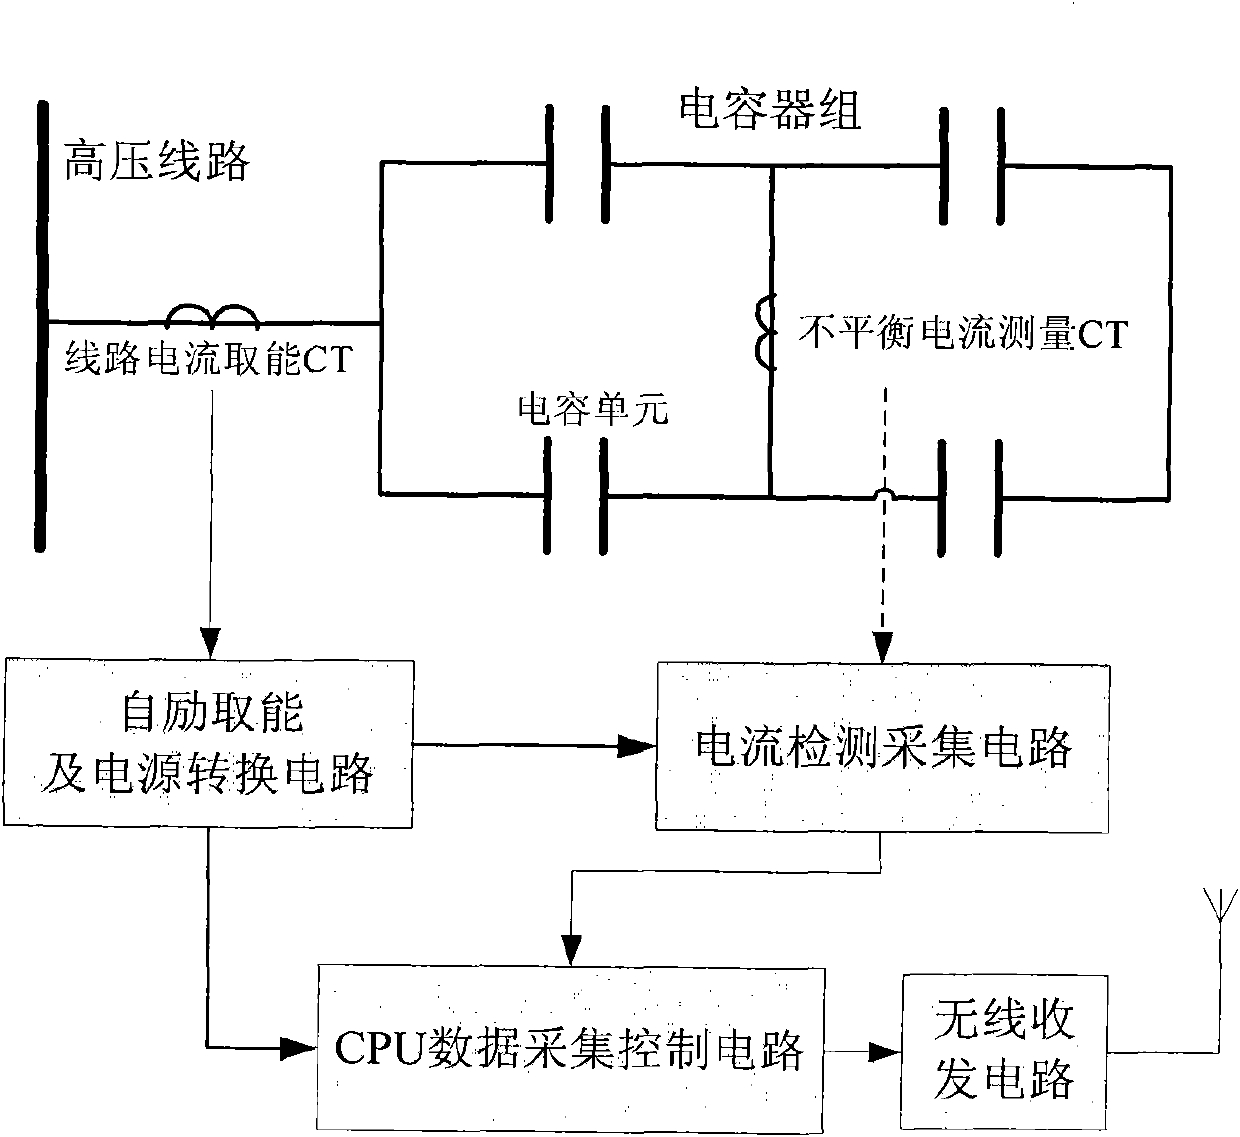 High-voltage capacitor bank branch current monitoring device